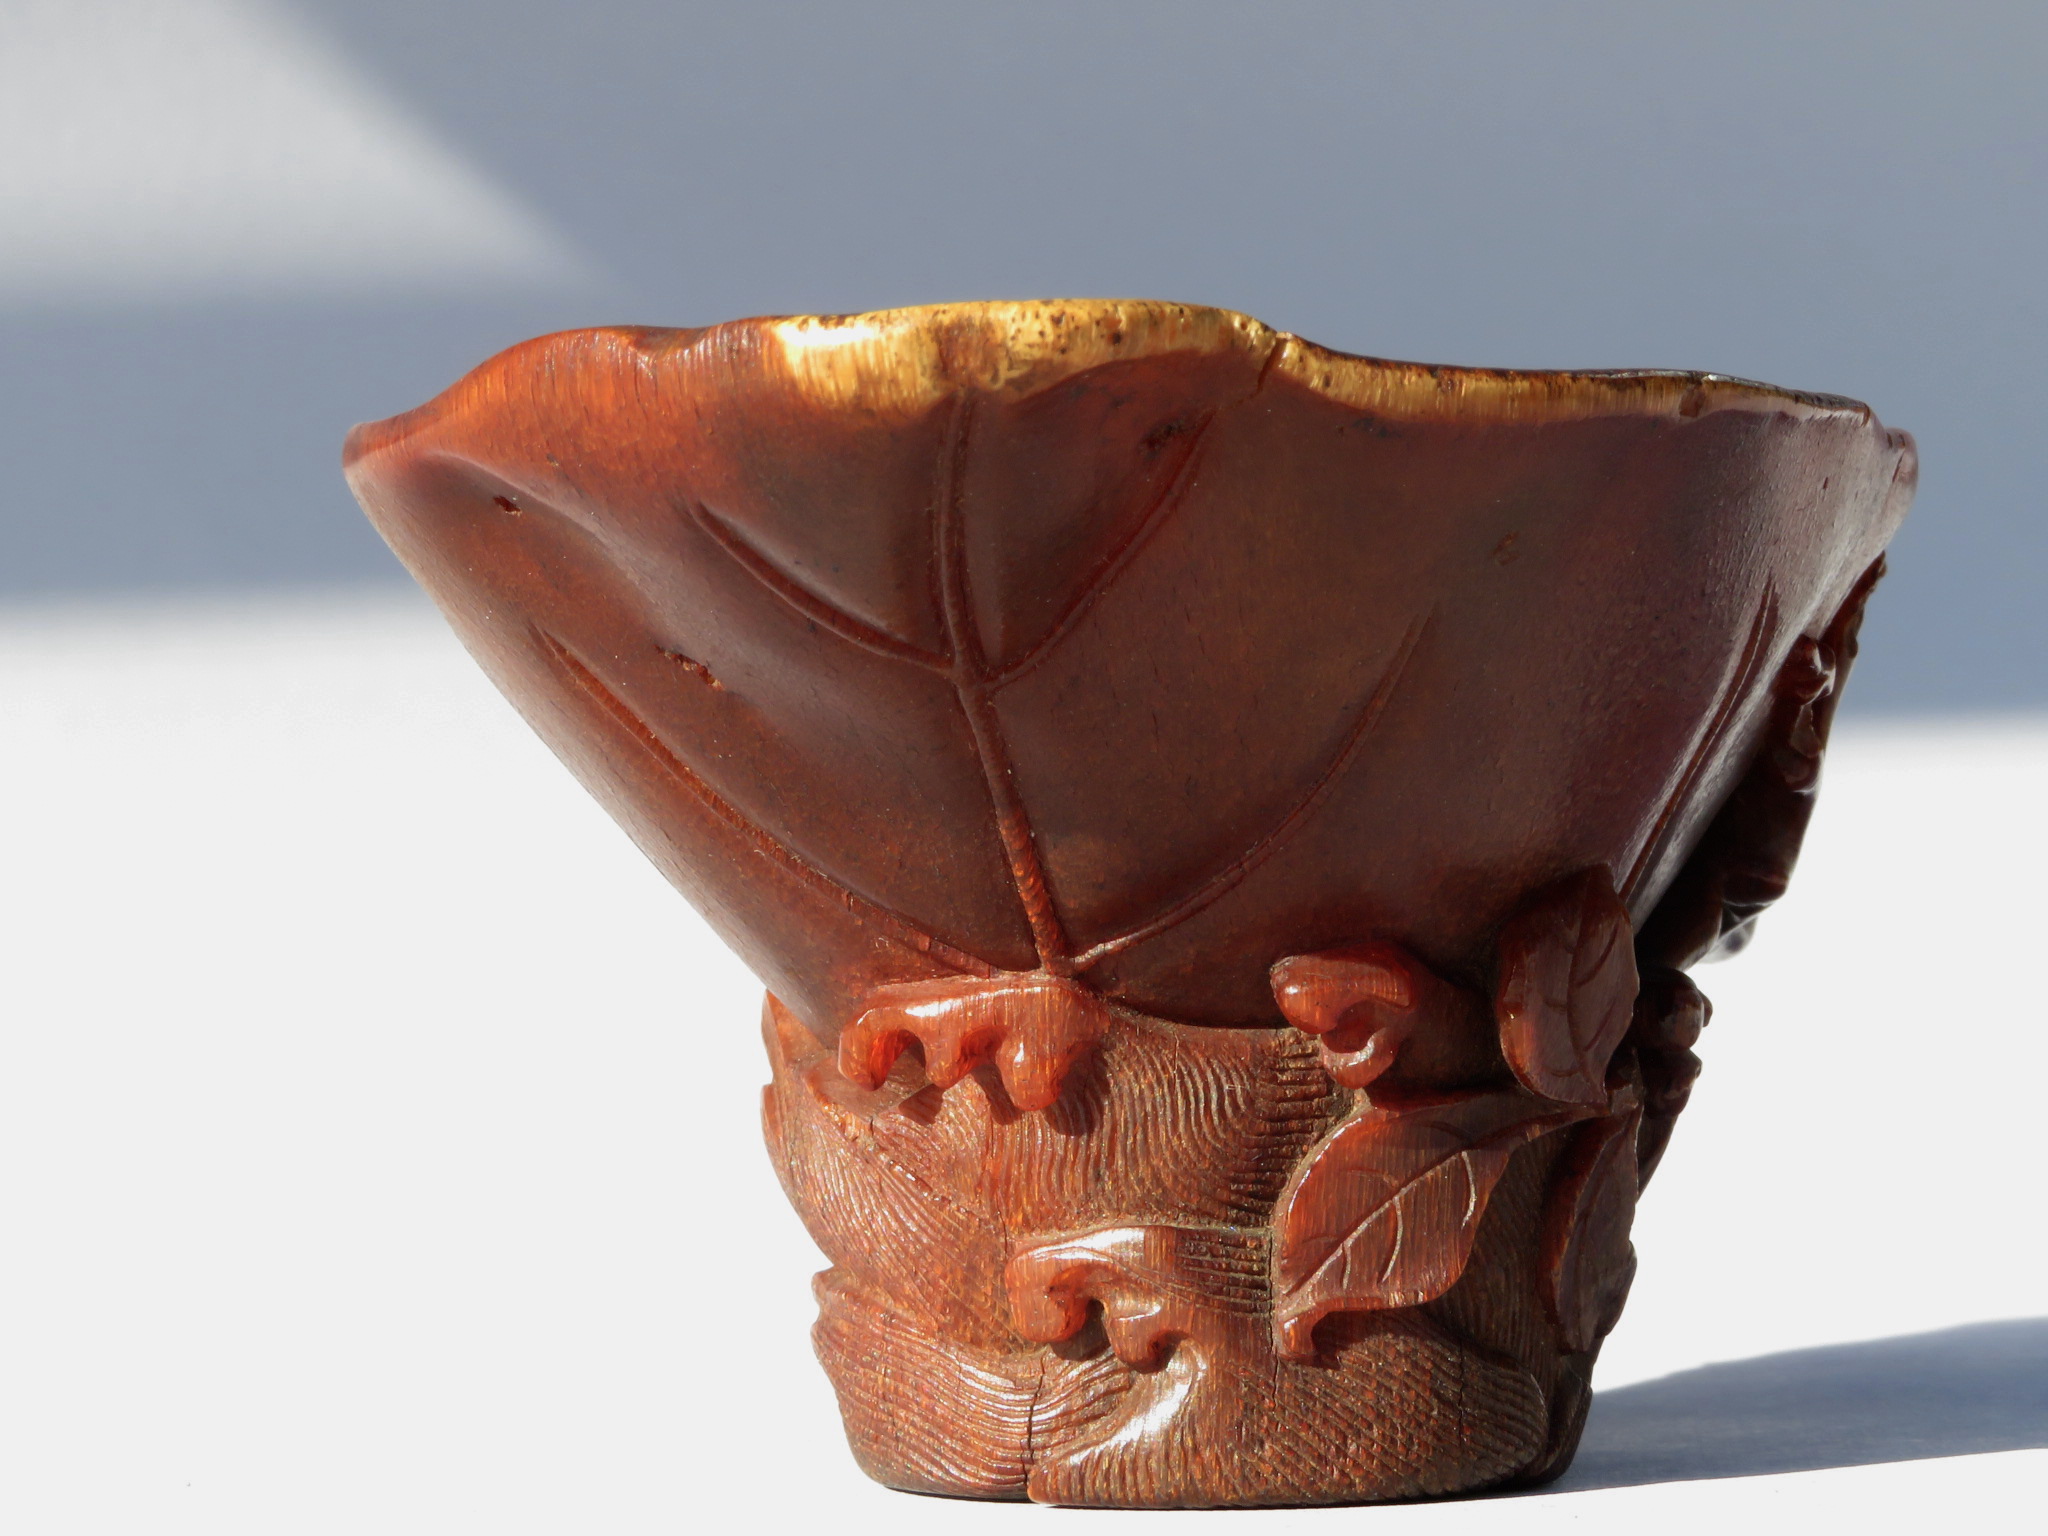 A RARE CHINESE RHINOCEROS HORN ‘CAMELLIA LEAF’ LIBATION CUP, QING DYNASTY, 17TH CENTURY - Image 17 of 30